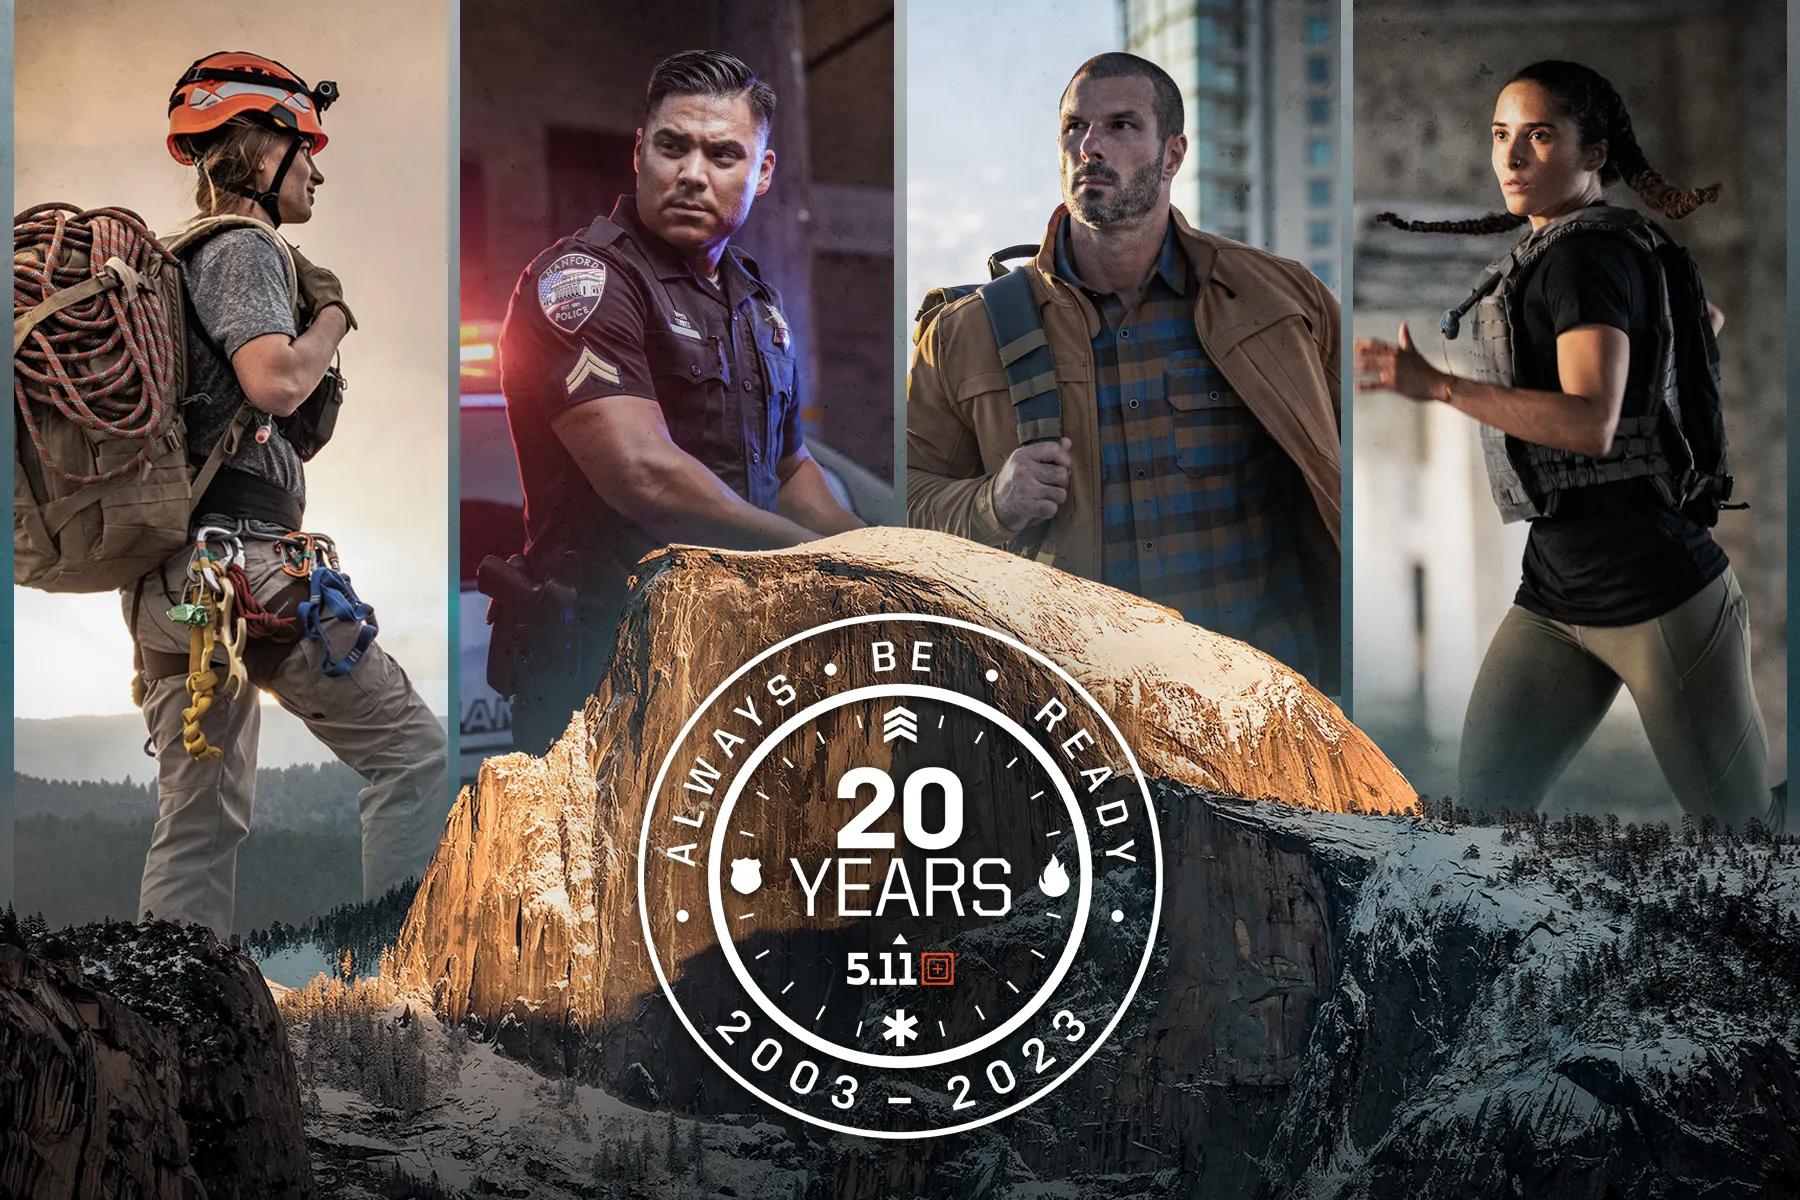 5.11 Tactical to Celebrate 20th Anniversary